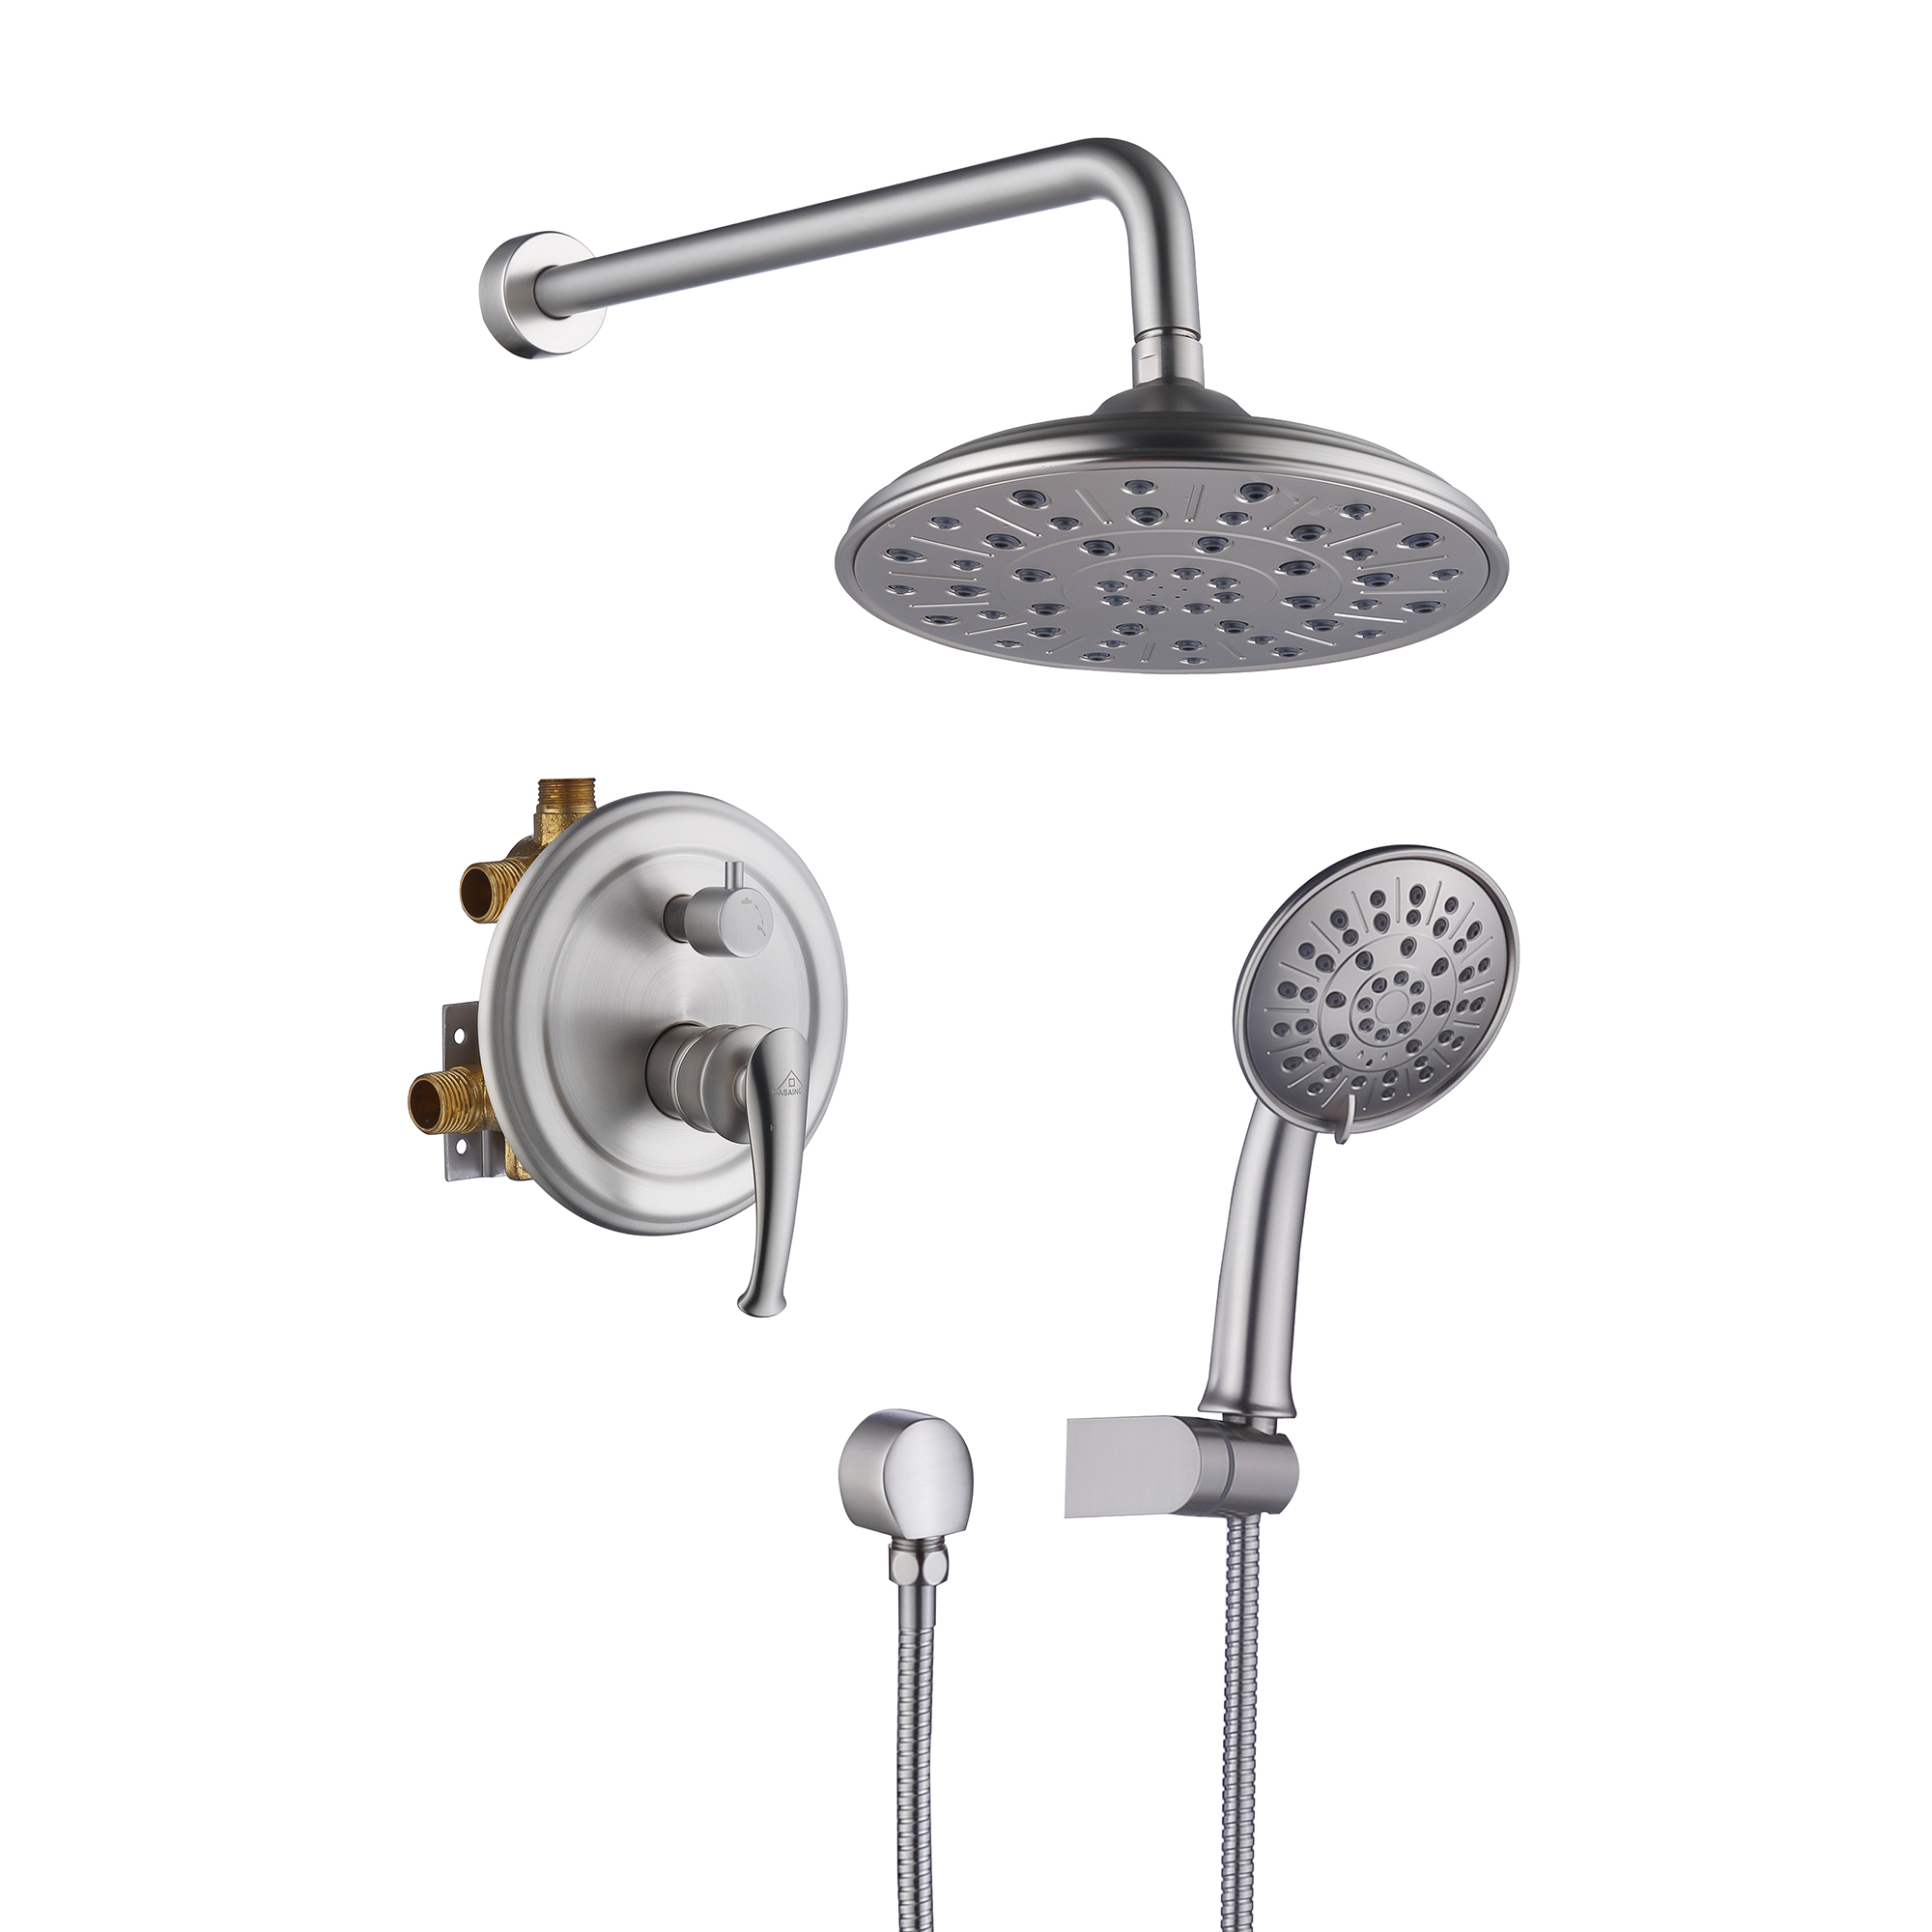 8.3inch Wall-mounted rain shower faucet with pressure balanced valve in brushed nickel providing a satisfying shower experience-CASAINC